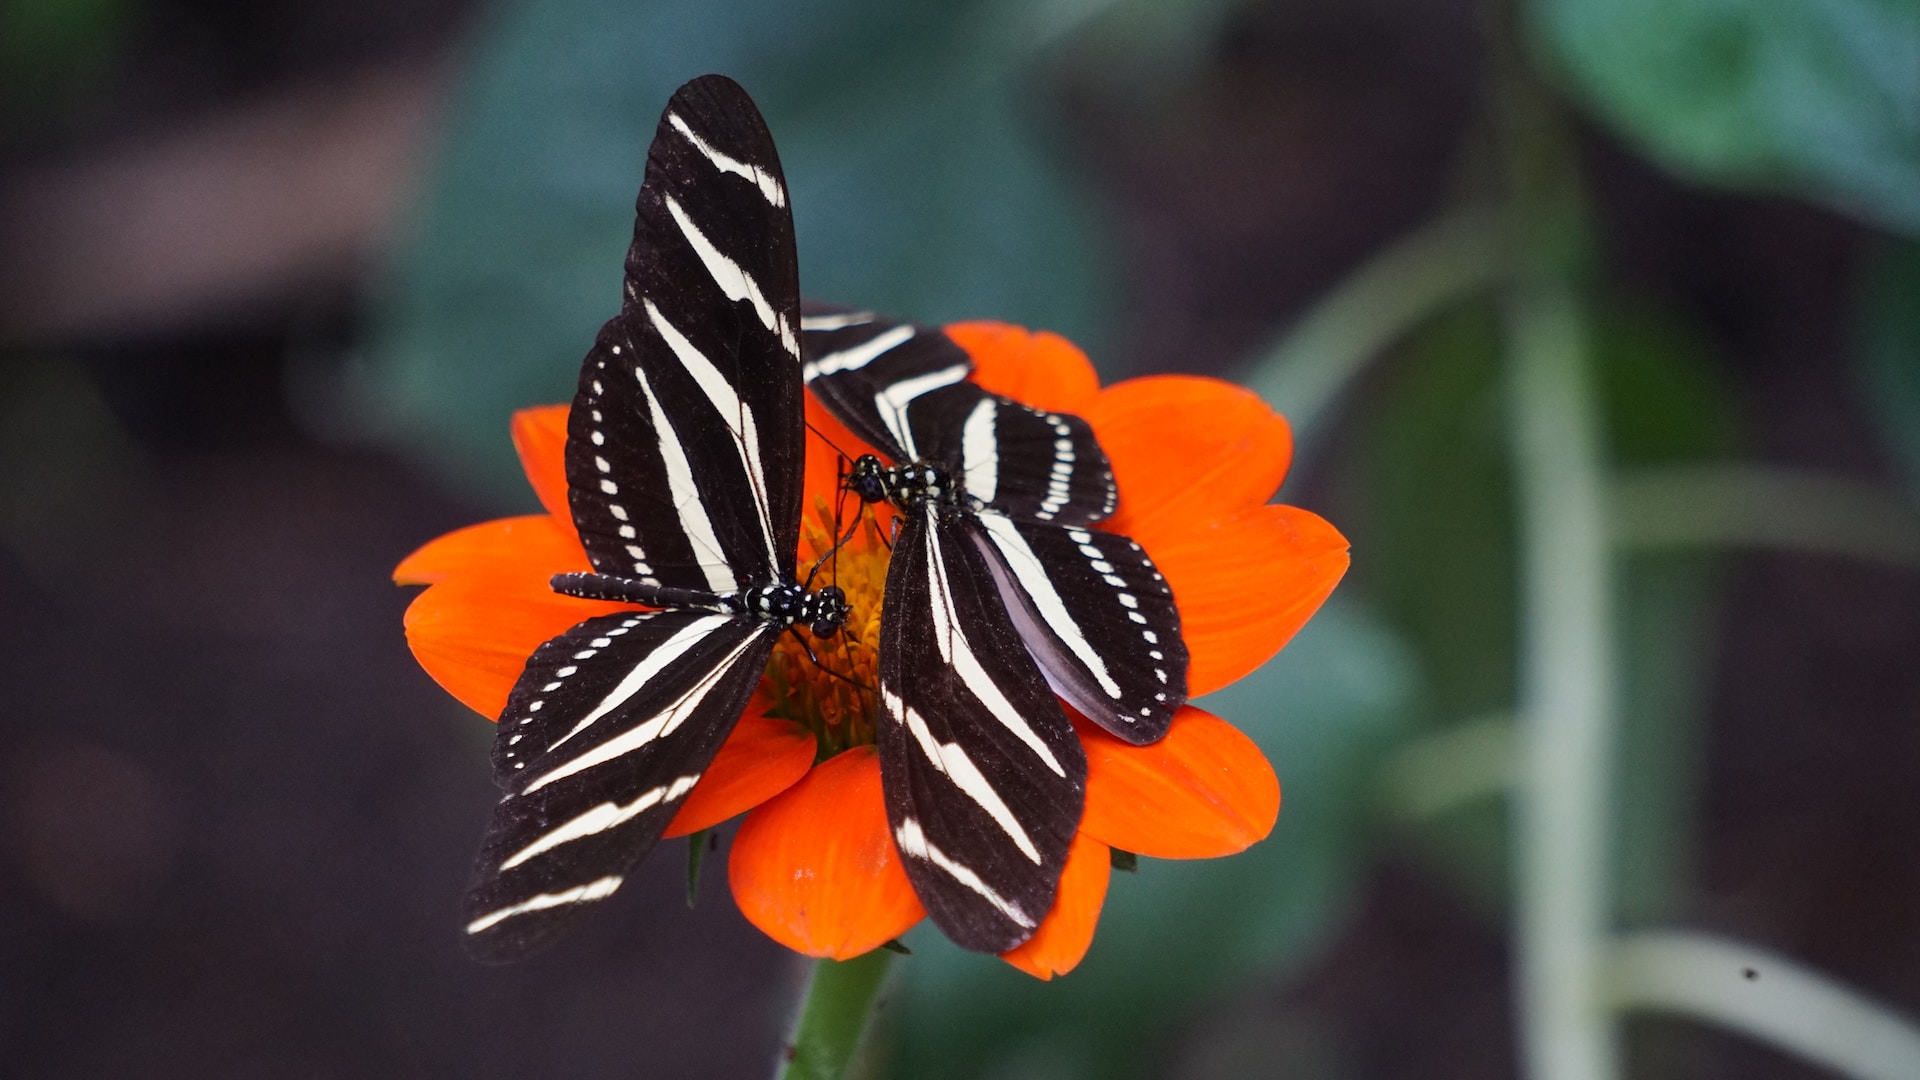 Black and white butterflies on an orange flower